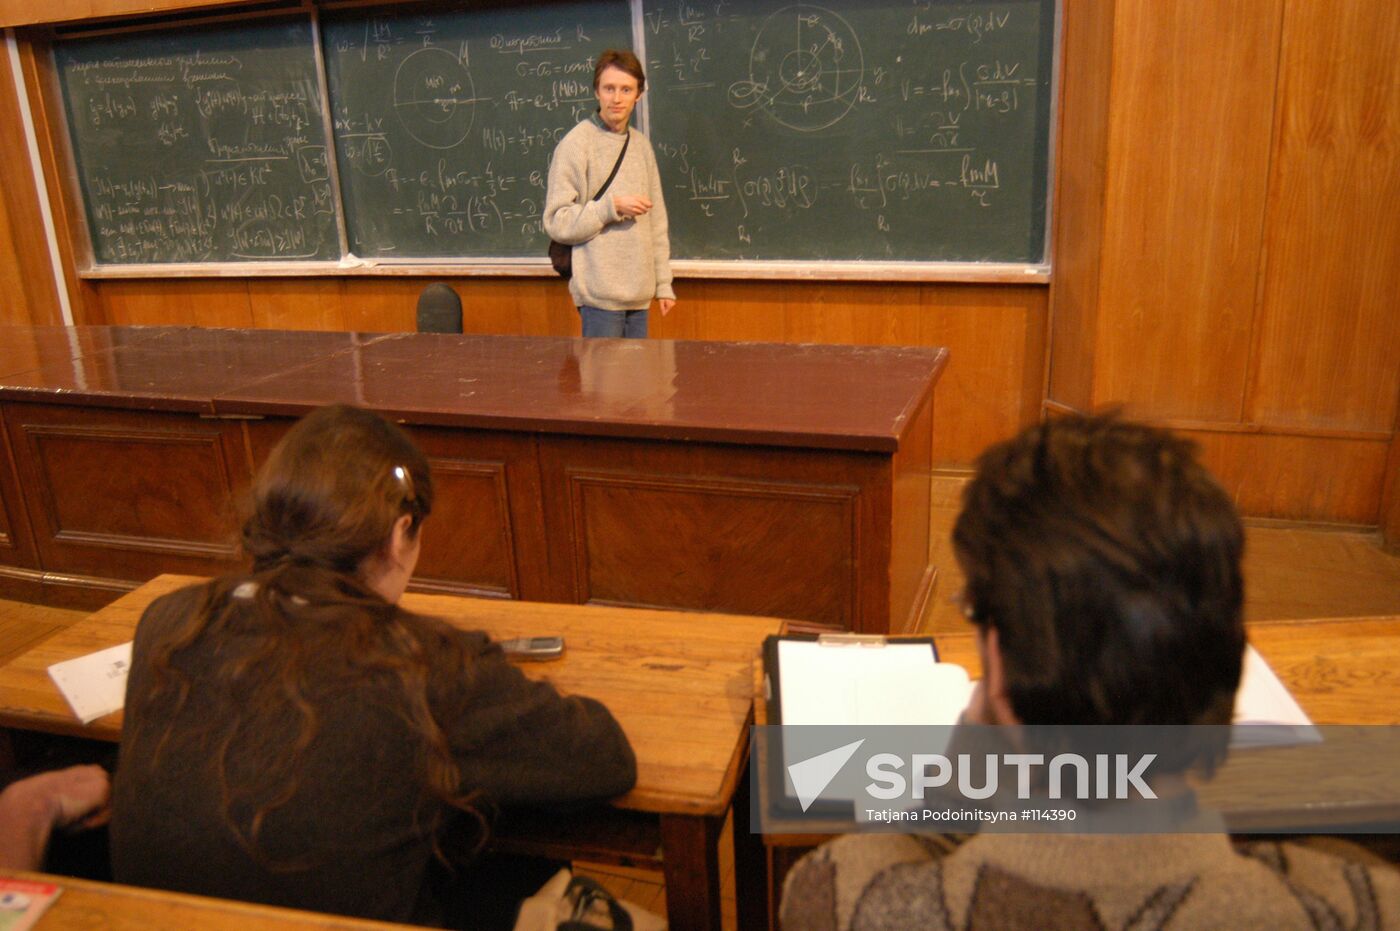 MOSCOW STATE UNIVERSITY CLASSROOM